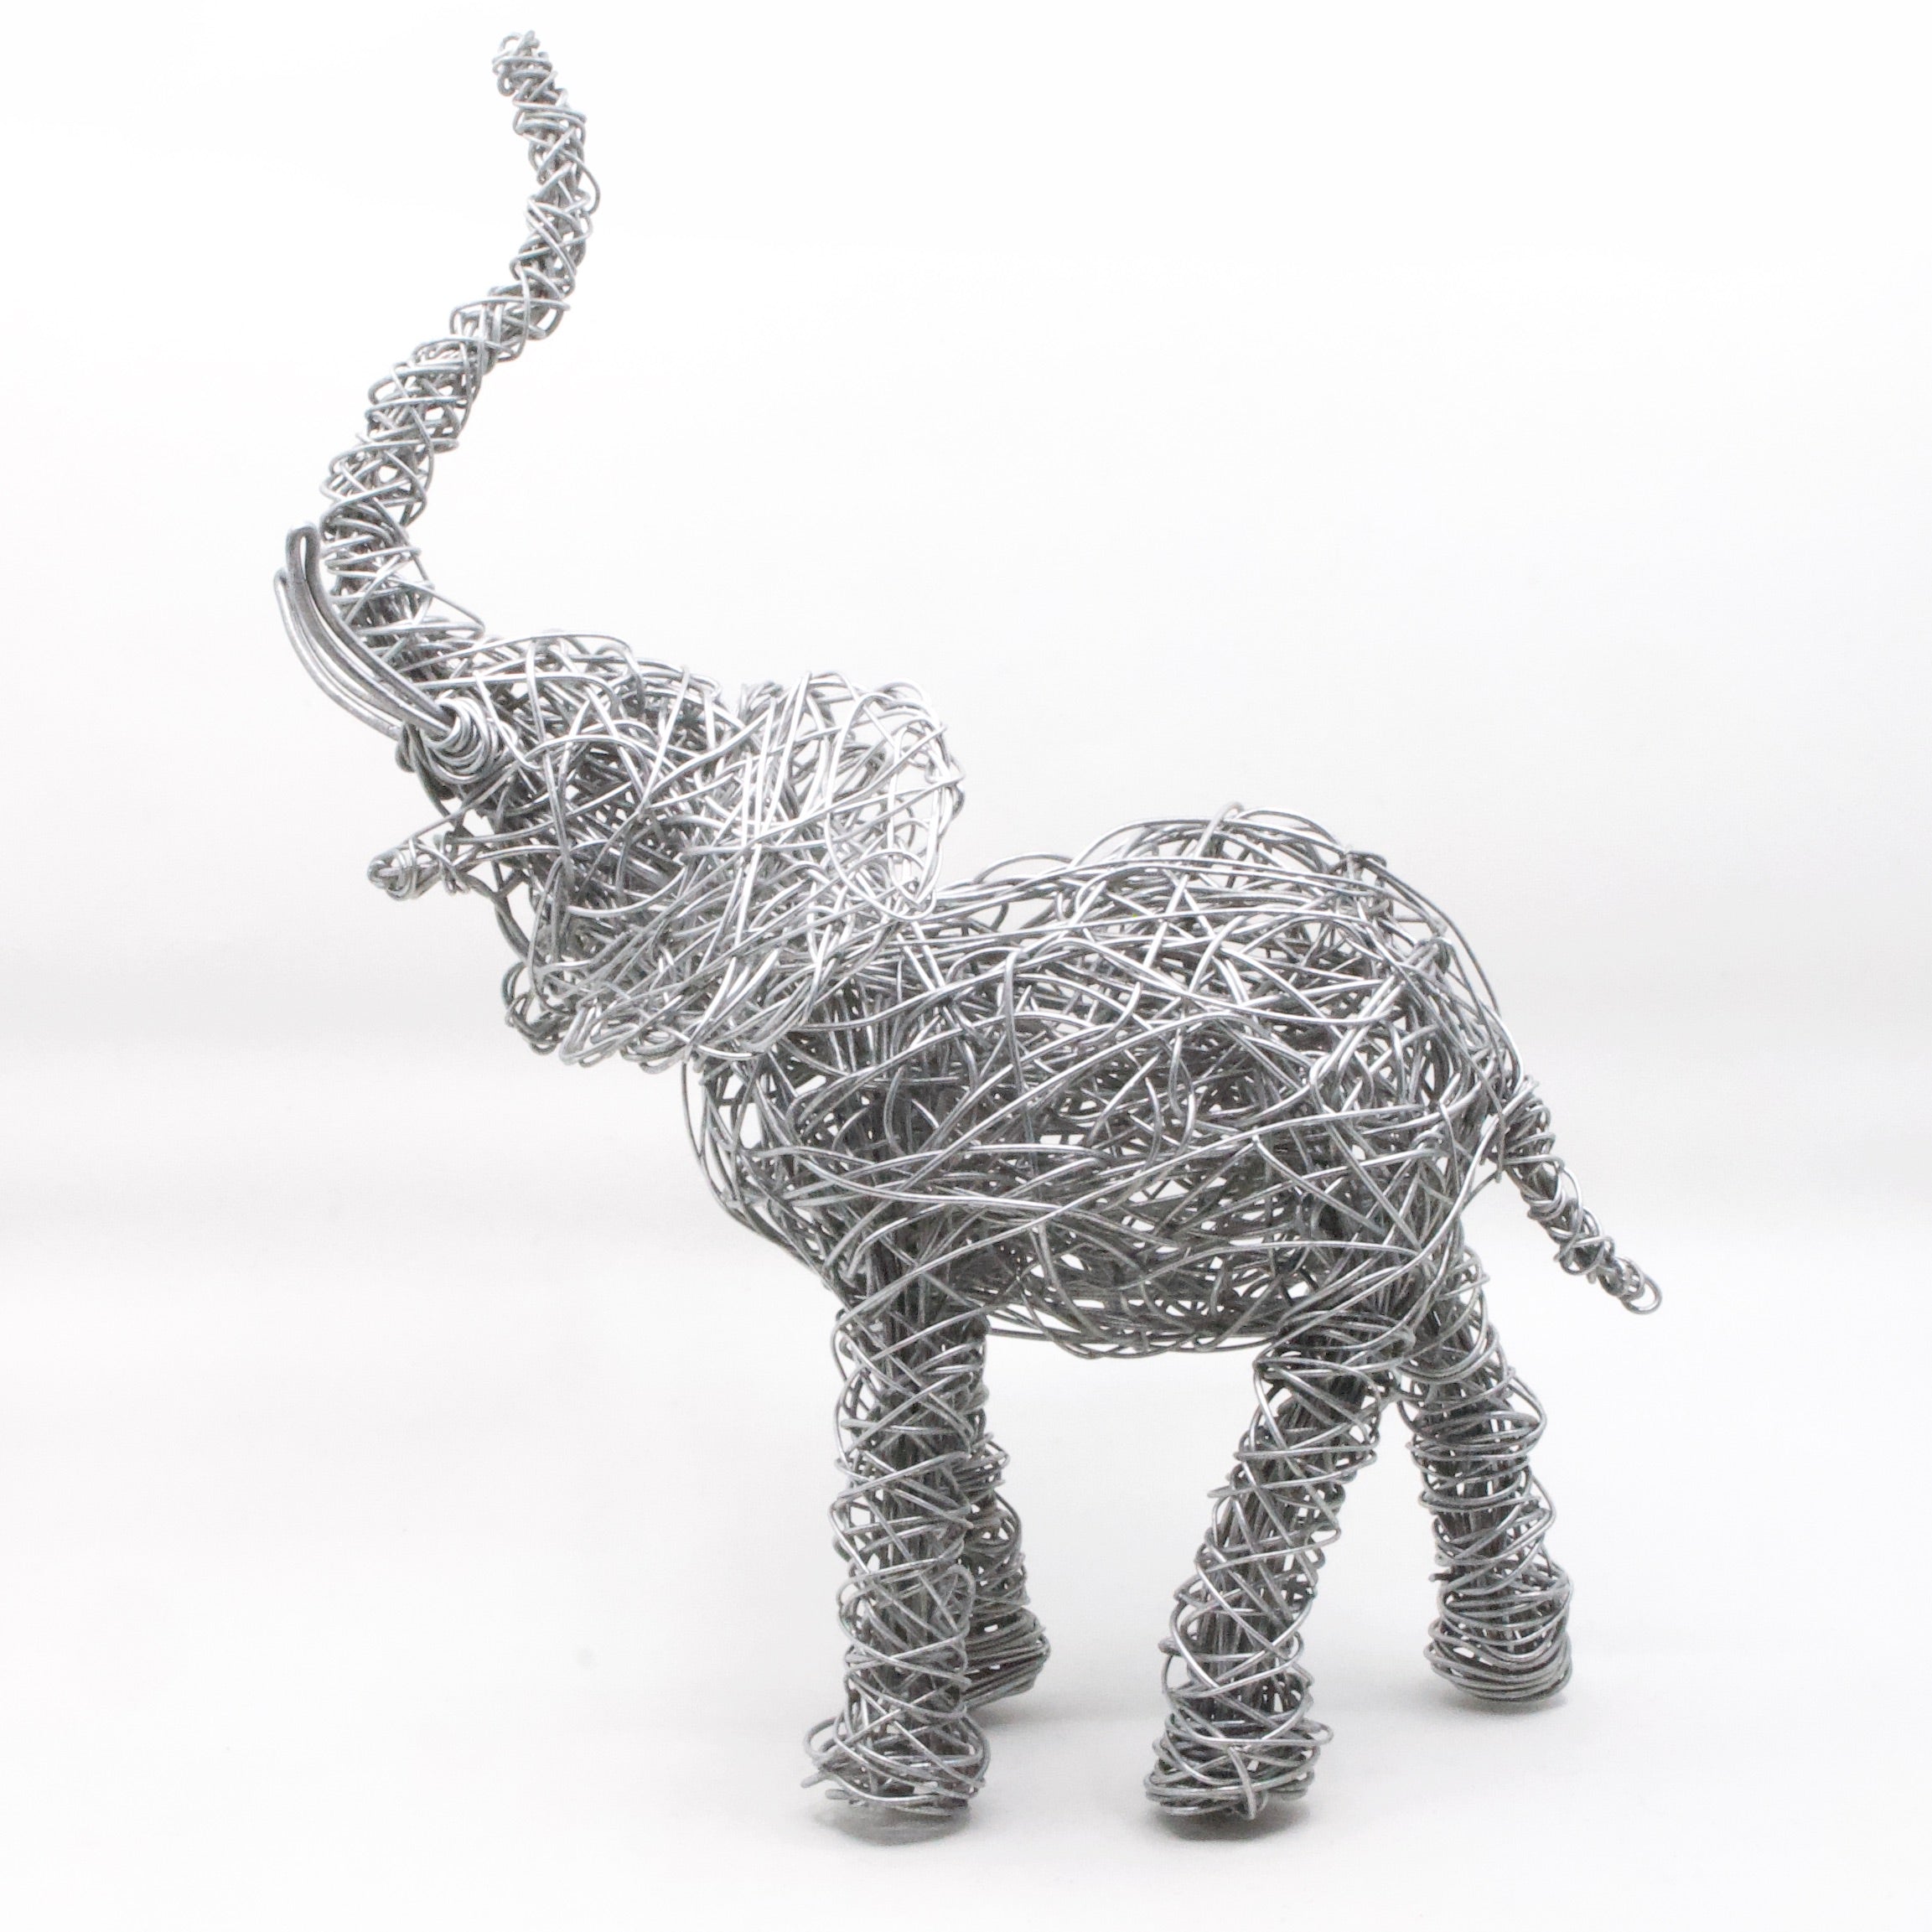 Hand Crafted Elephant Wire Art Sculpture - Large – MisHMasH Imports